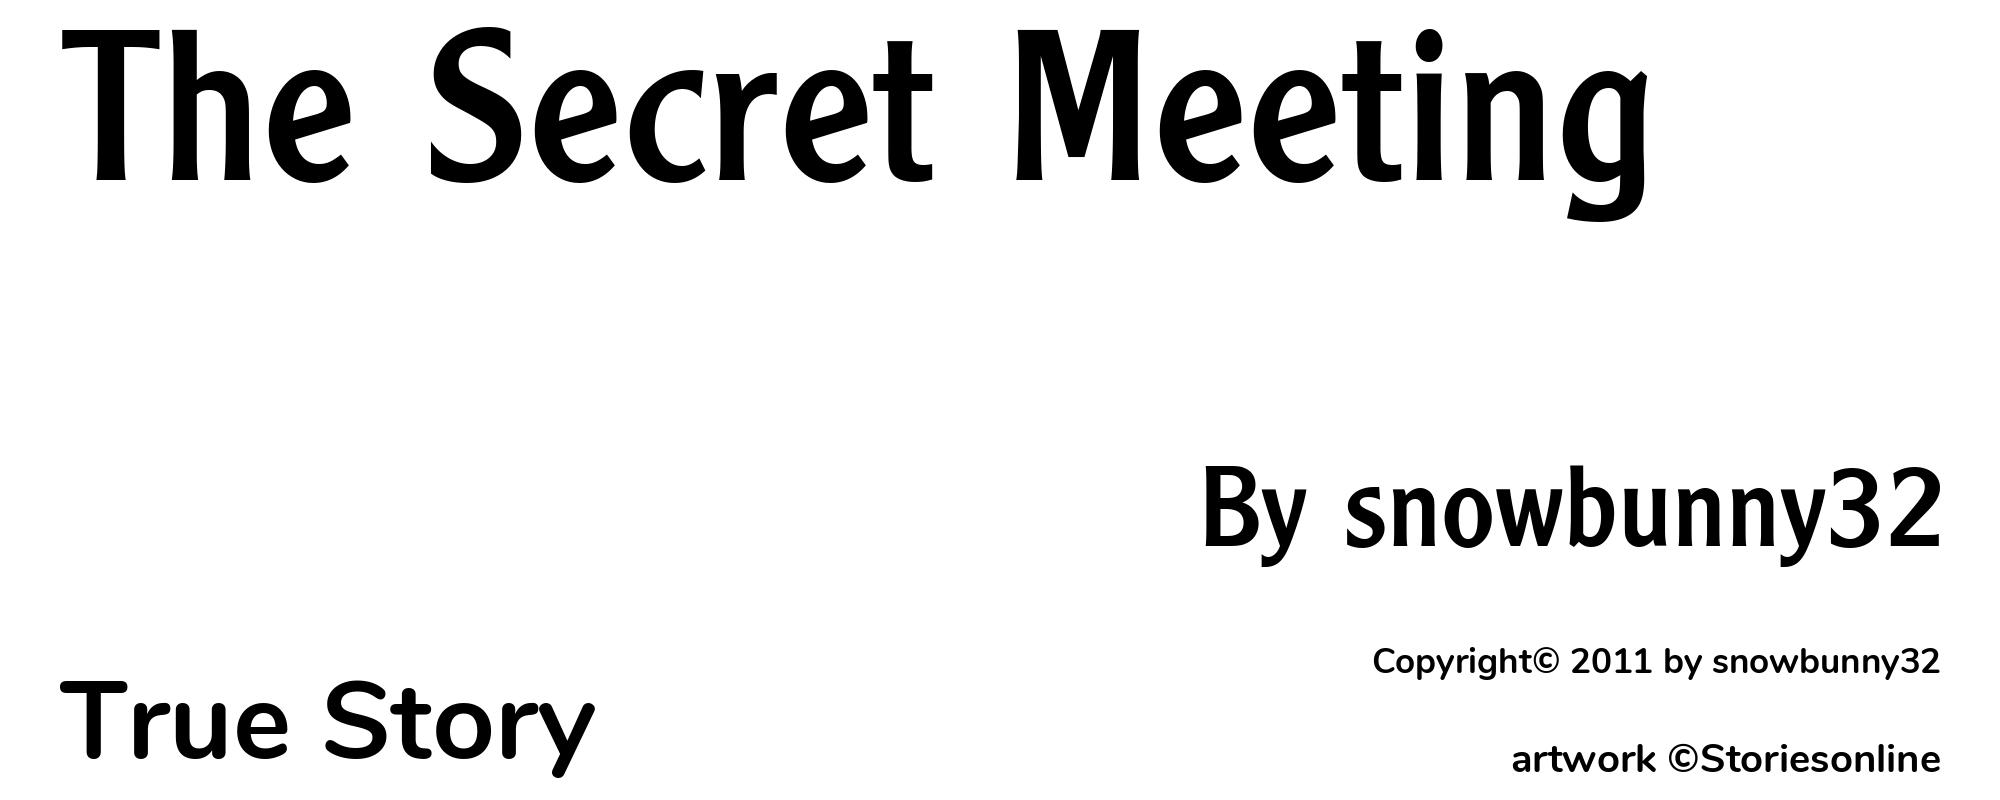 The Secret Meeting - Cover